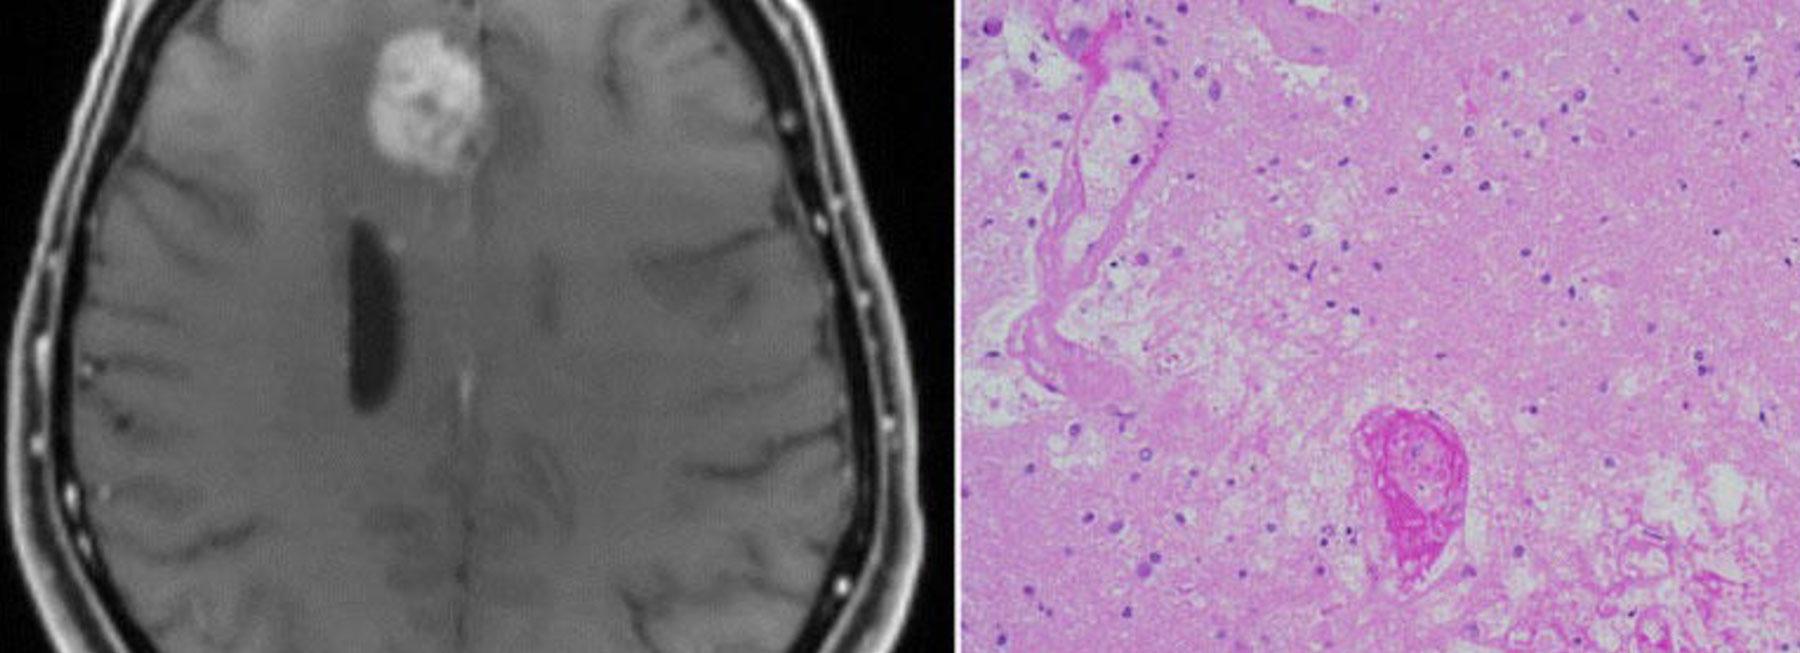 MRI scan and histology example of "pseudoprogression": imaging suggested a patient with glioblastoma had a growing tumor after treatment, but tumor sample analysis indicated the treatment did kill most of the tumor.